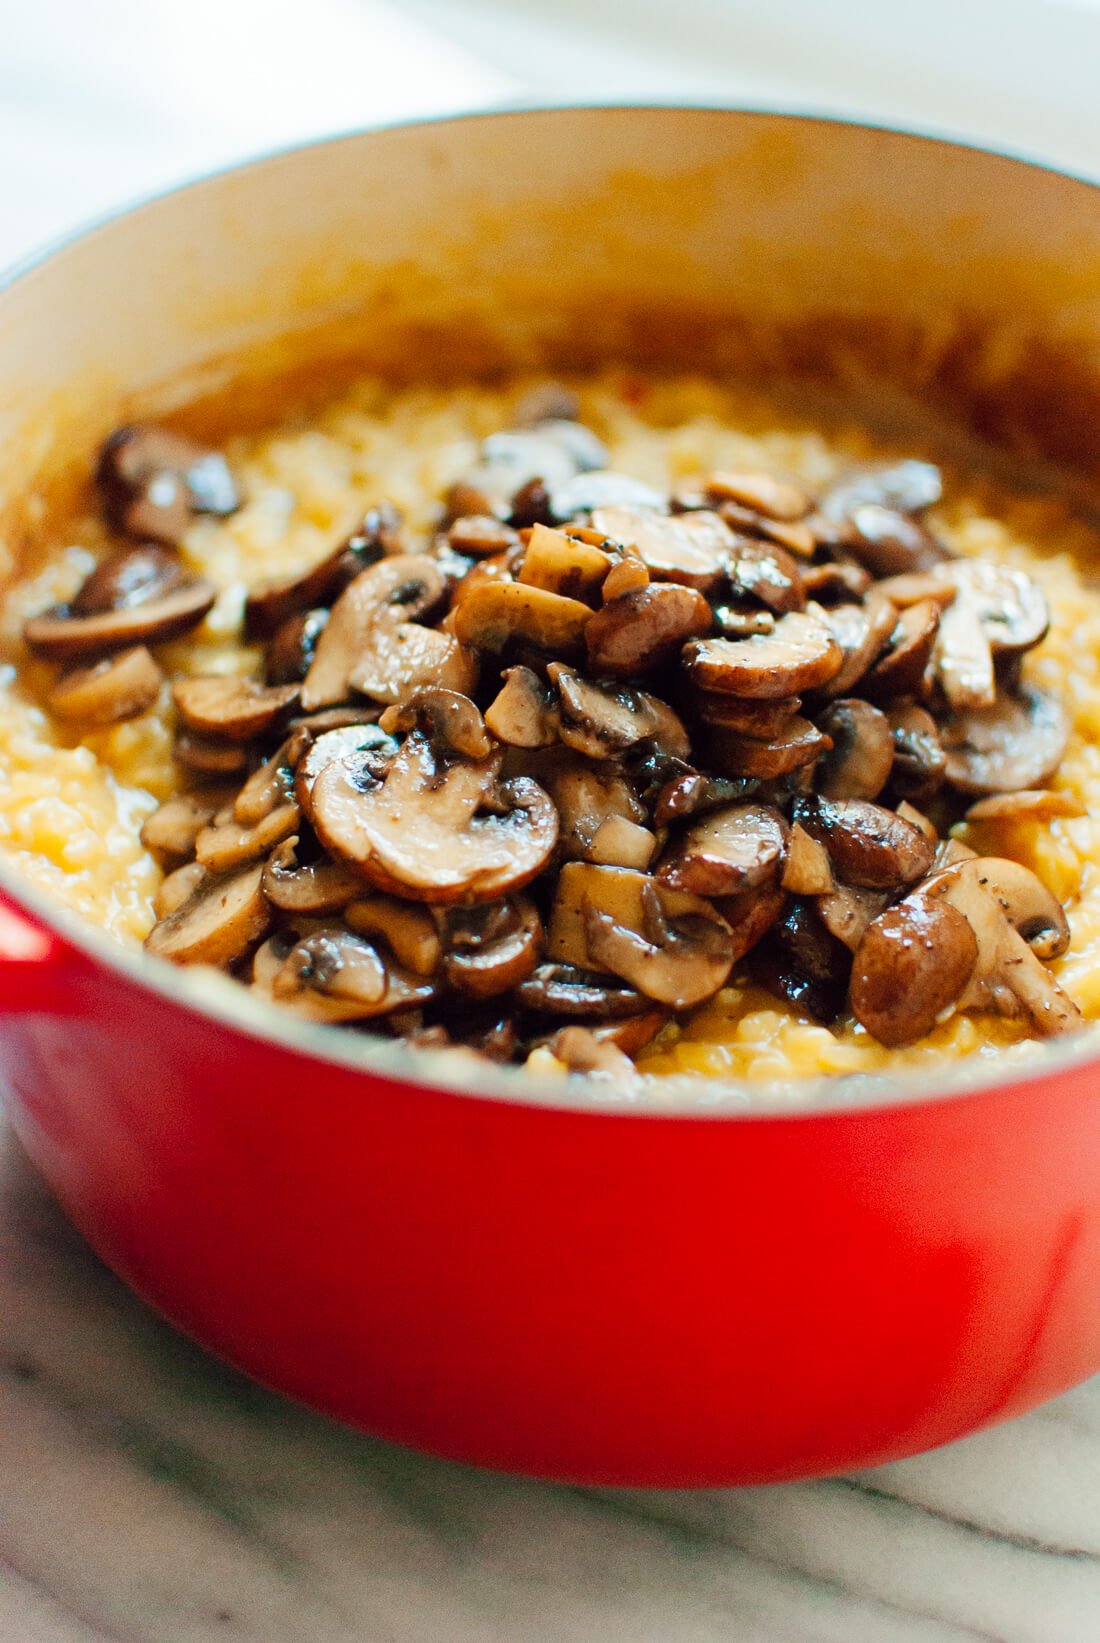 Rich and creamy mushroom brown rice risotto